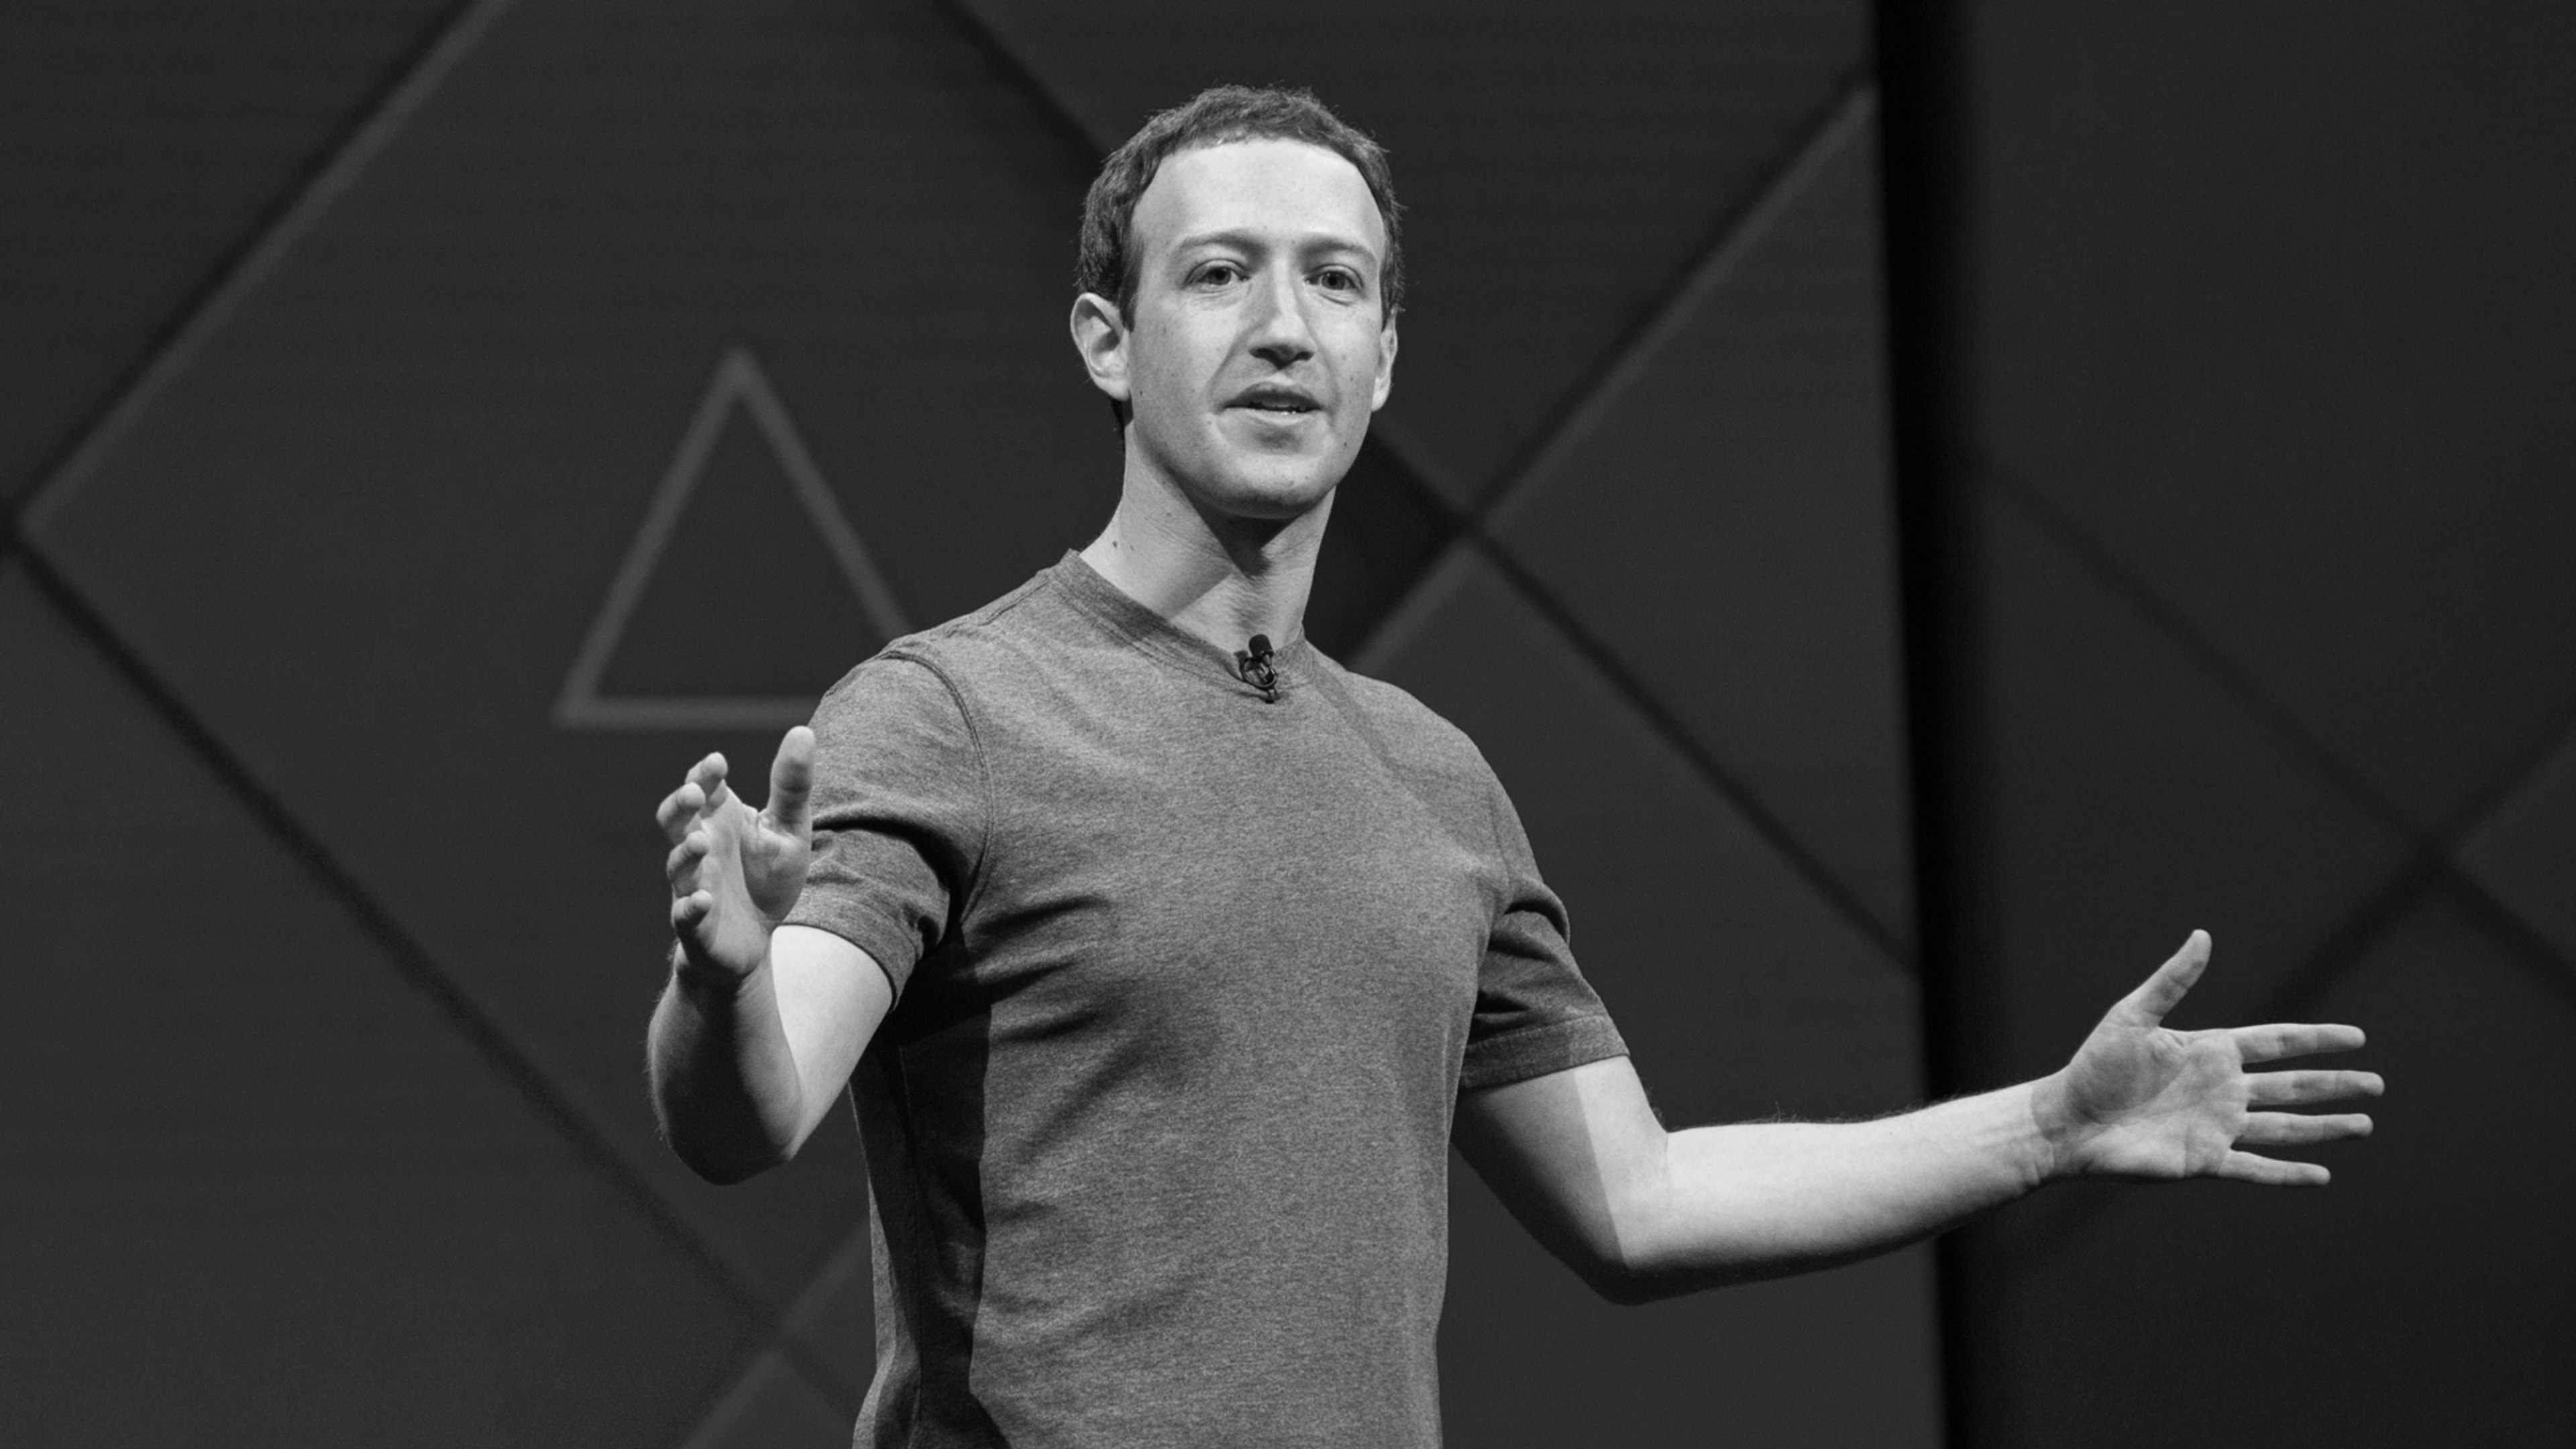 Mark Zuckerberg lost $6 billion and his head of security in one day